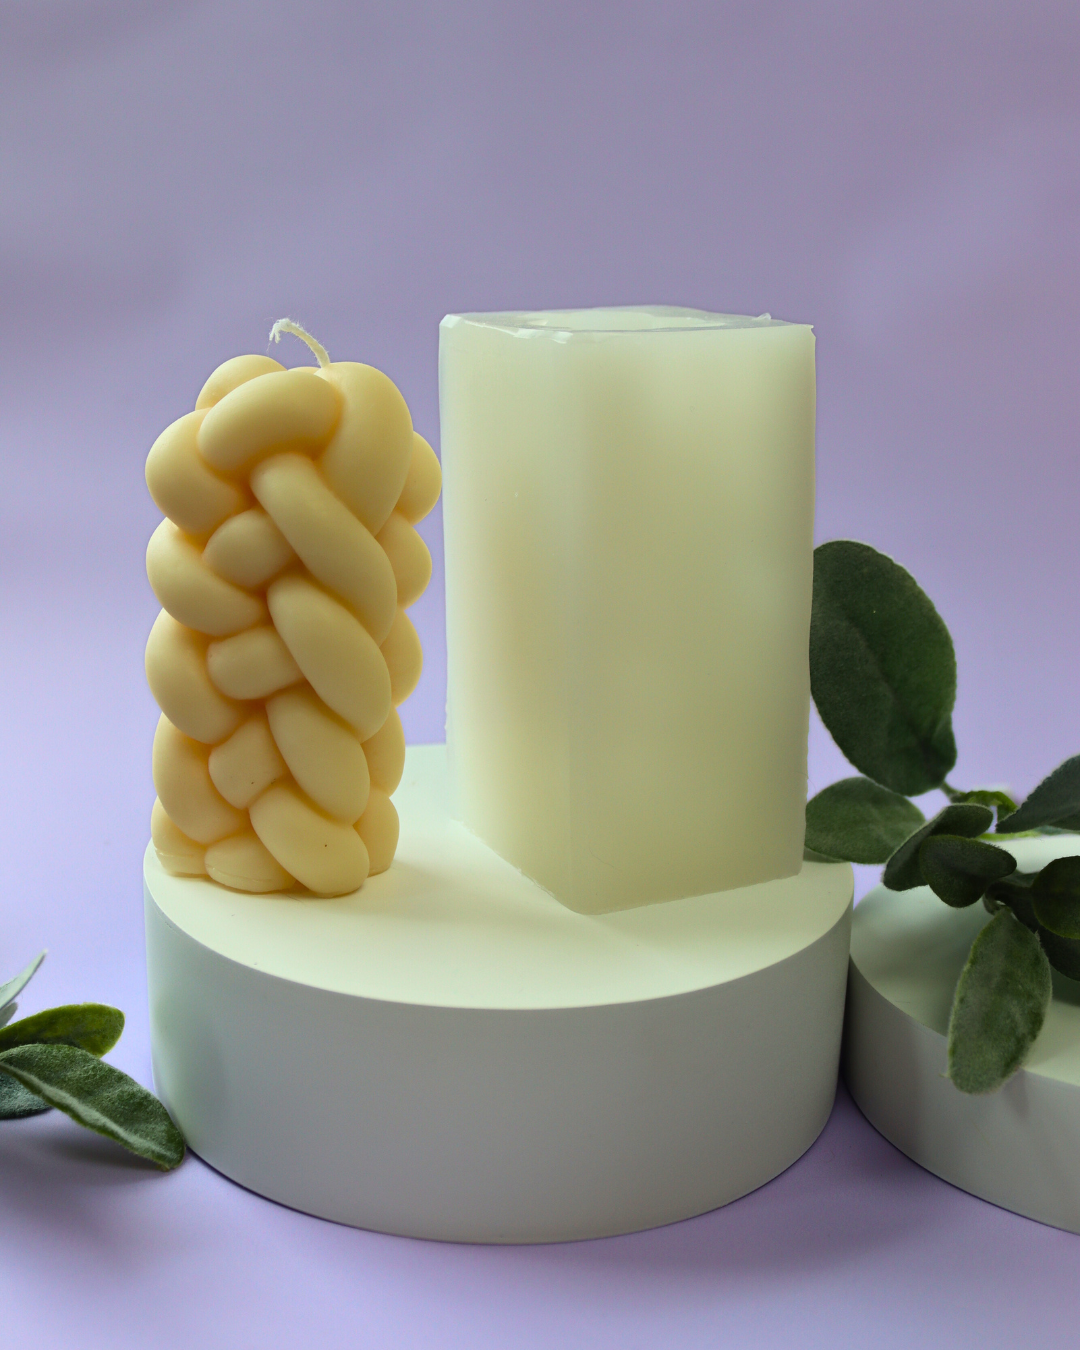 NEW Festive Braided Pillar Candle (Makes 1 Candle)